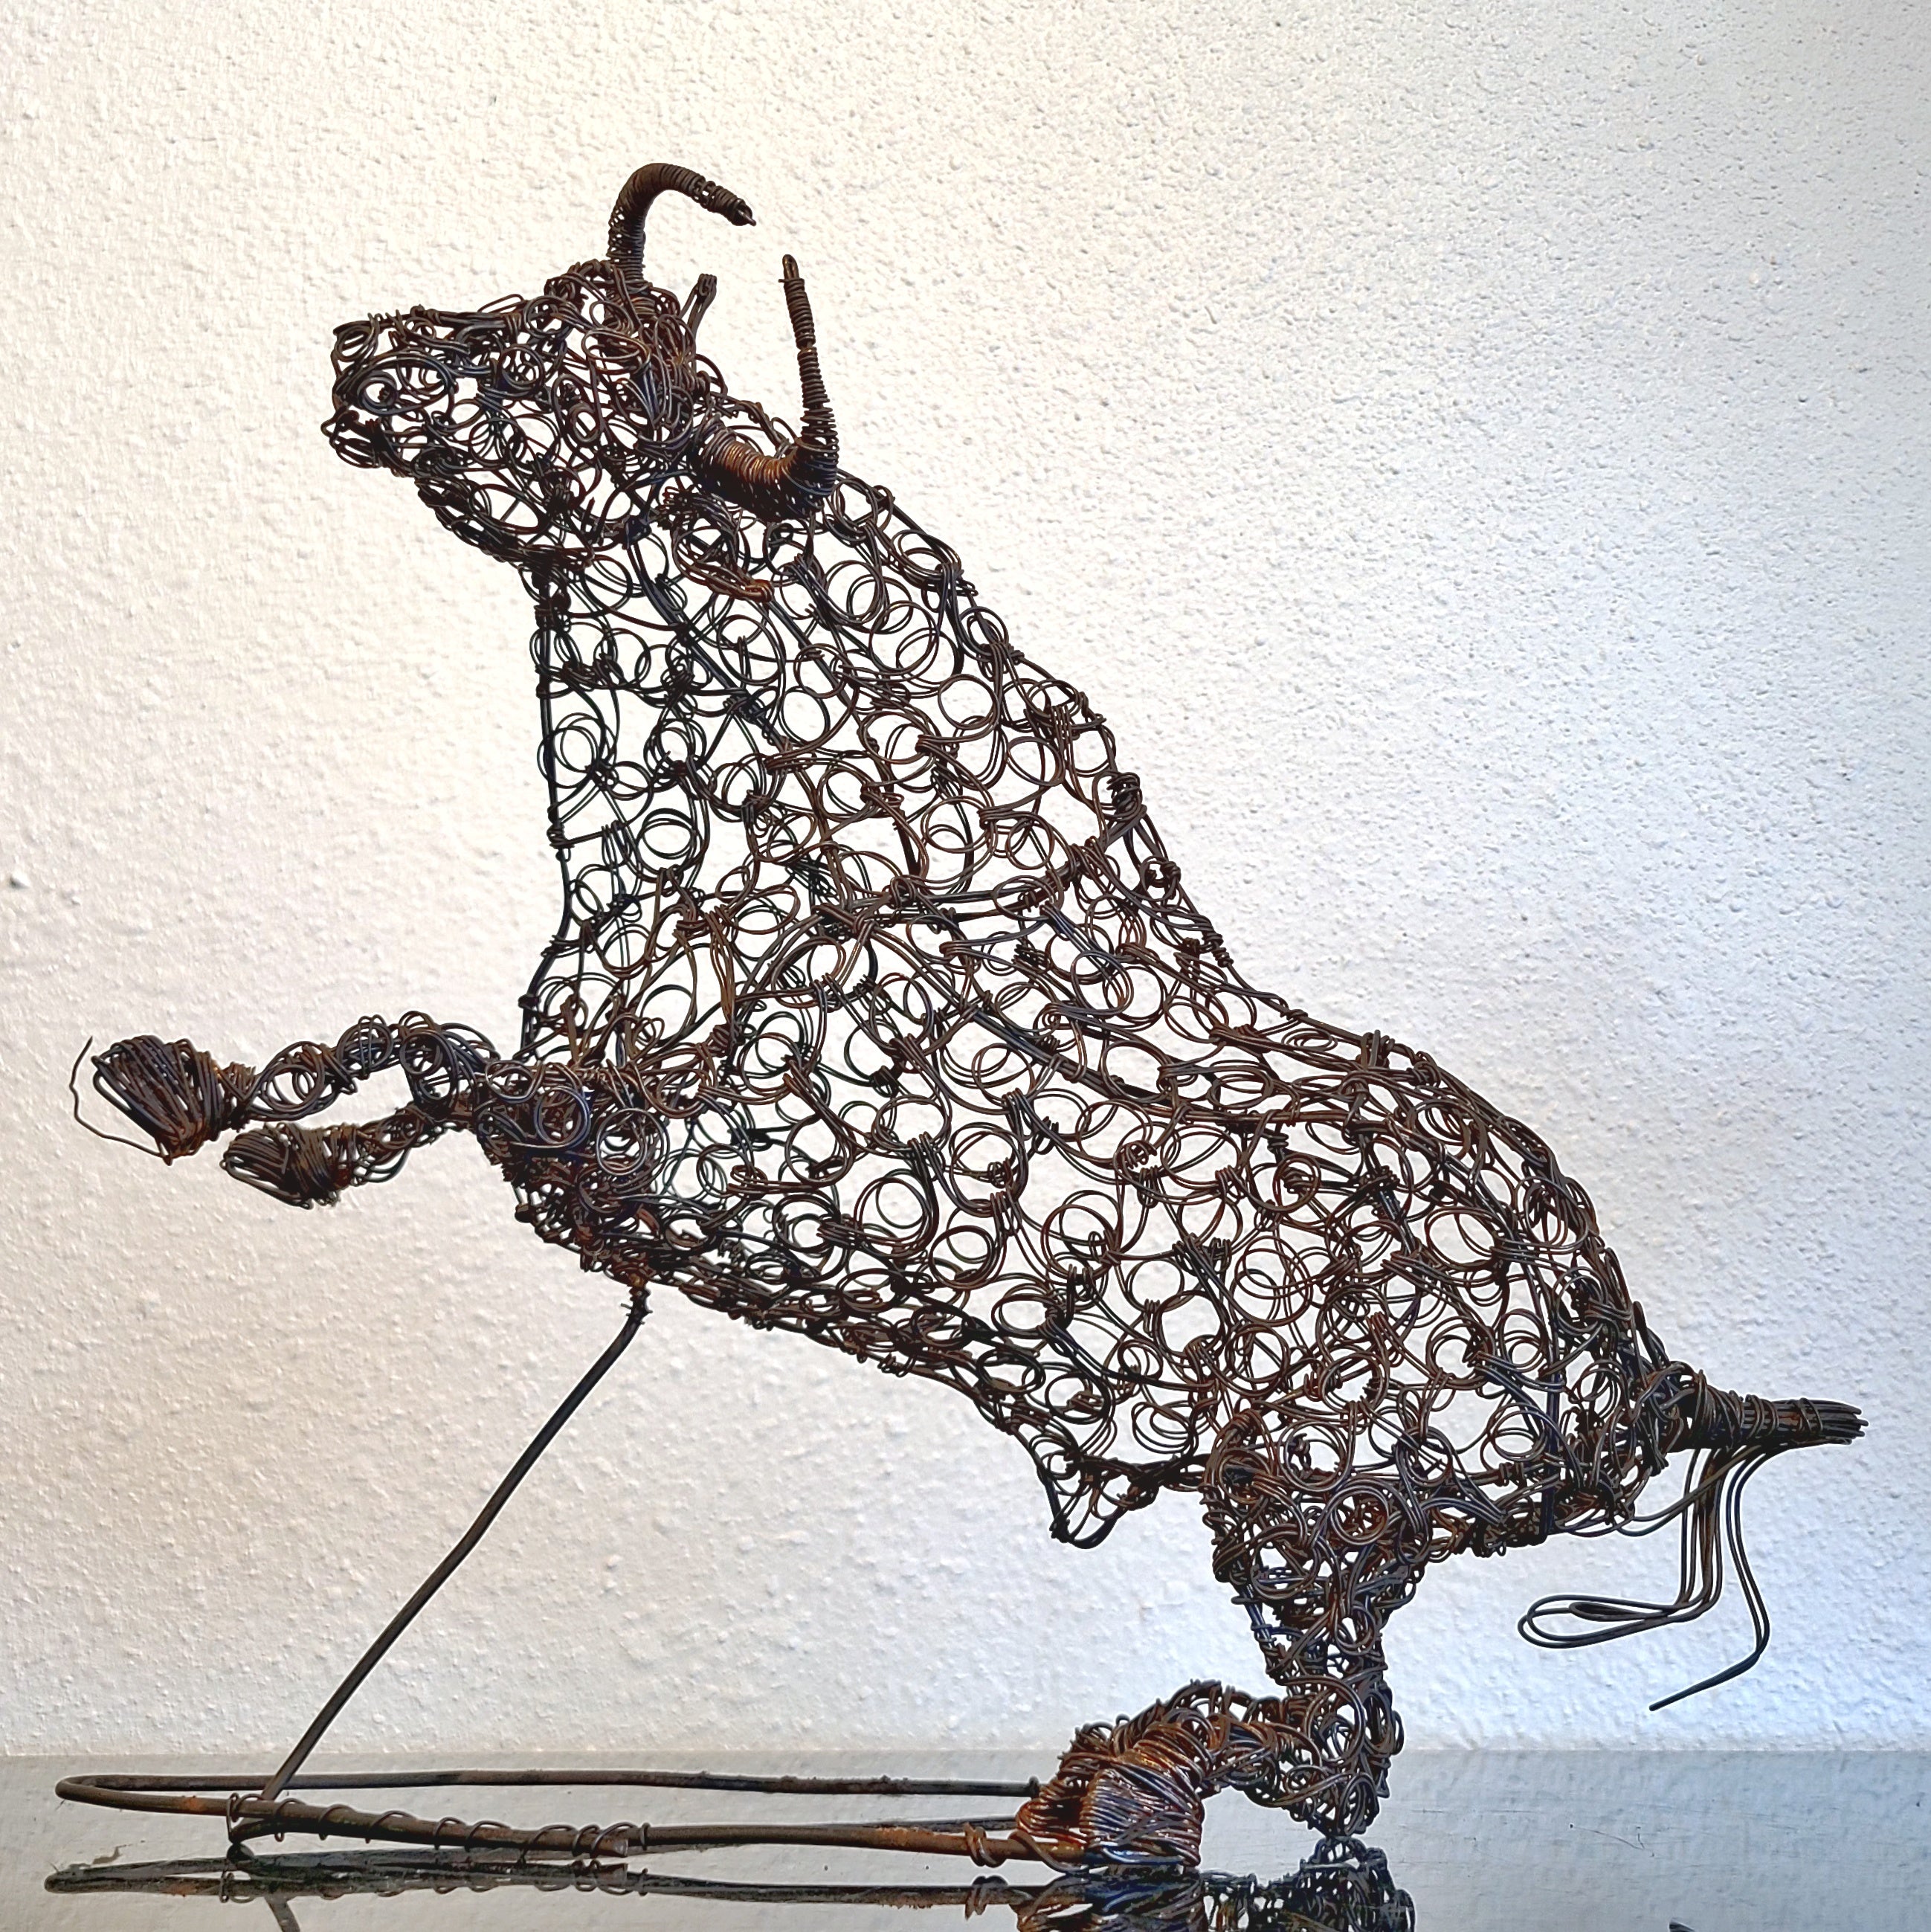 TWISTED WIRE SCULPTURE OF BANDERILLERO AND BULL